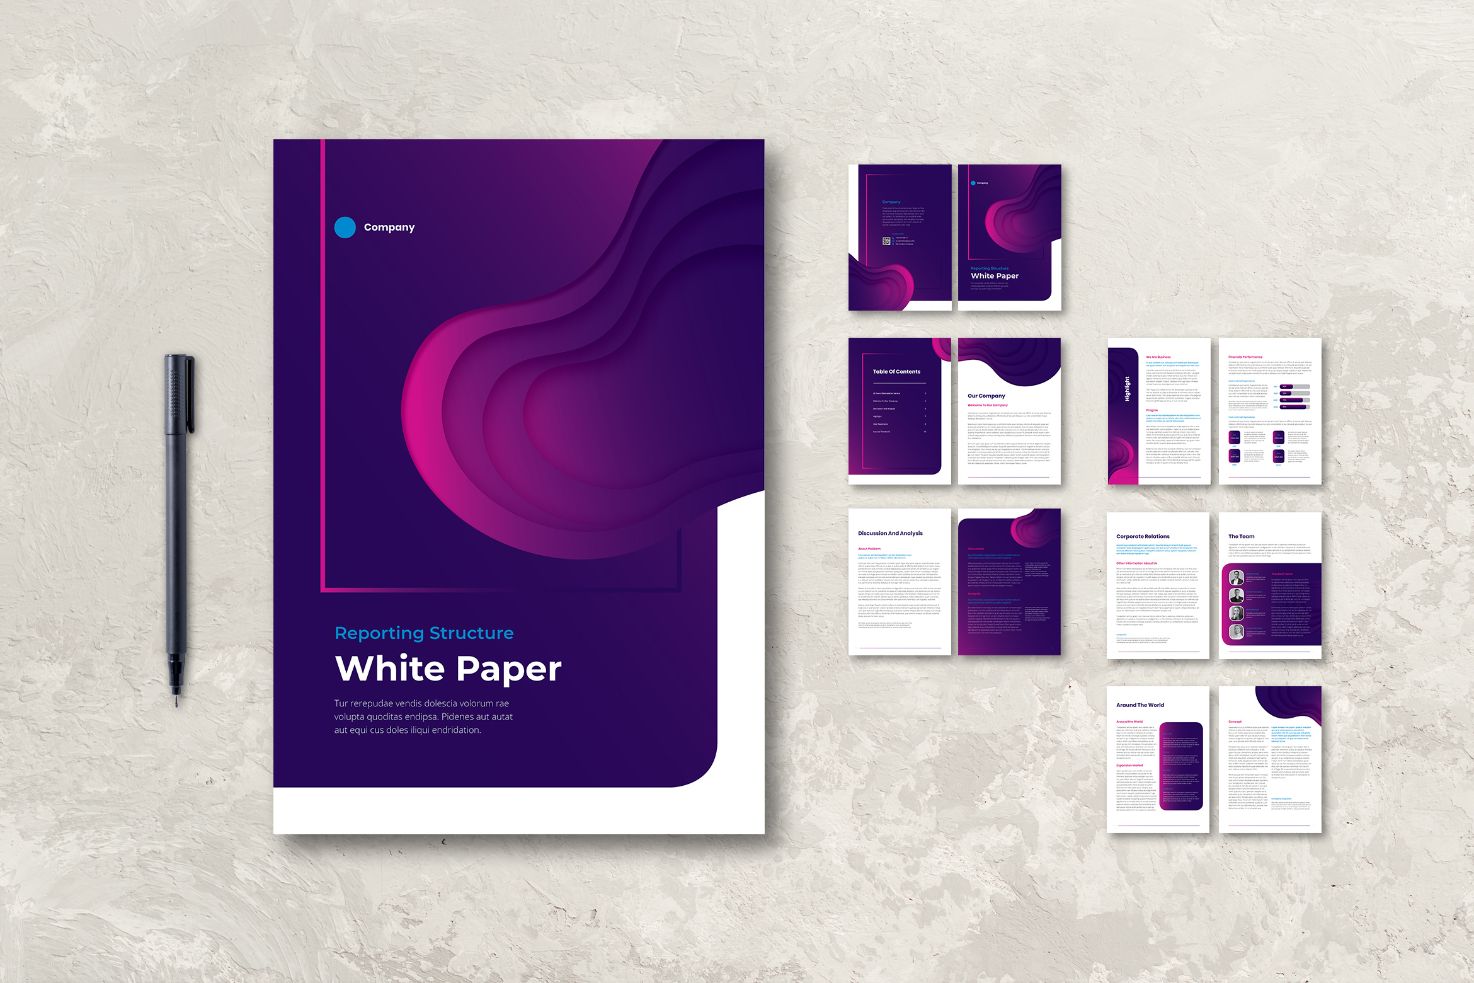 Whitepaper Company Progress Report Template Design - Modern and Abstract Gradient Pink and Purple Theme